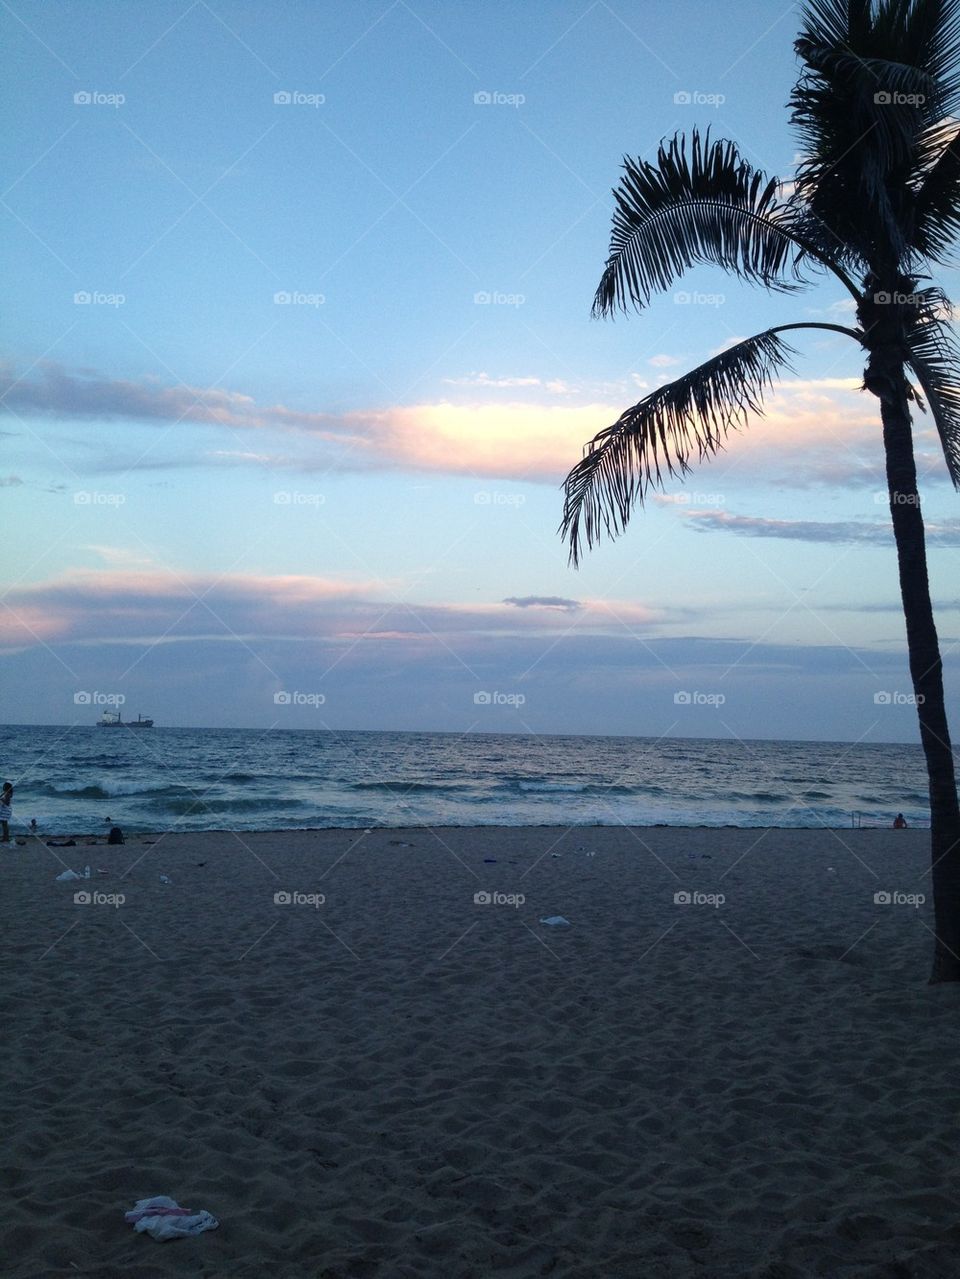 Sunset in Fort Lauderdale.